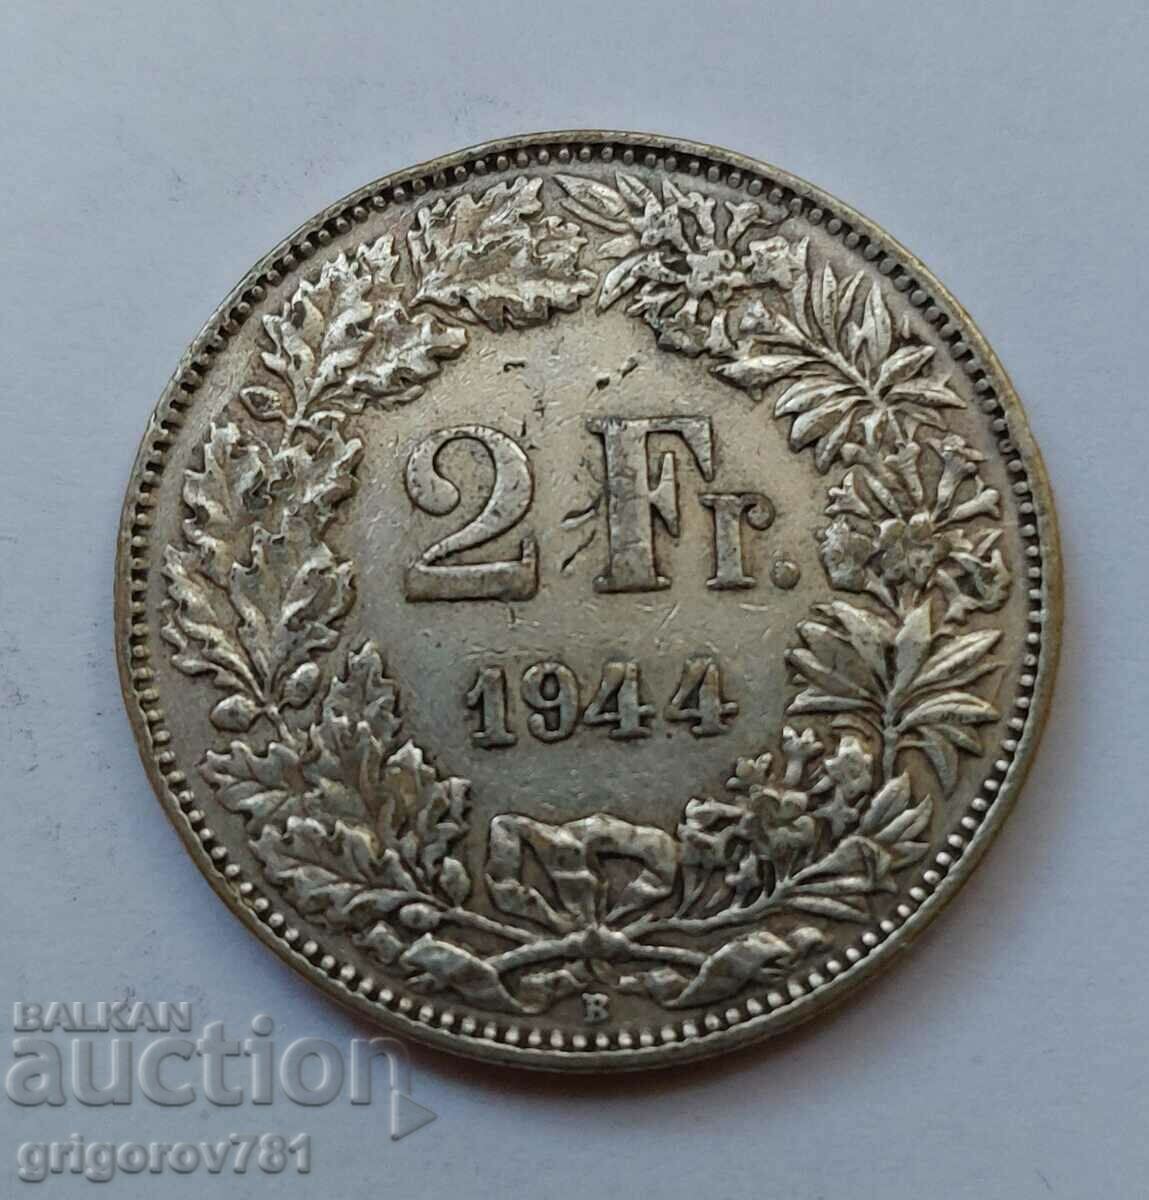 2 Francs Silver Switzerland 1944 B - Silver Coin #7